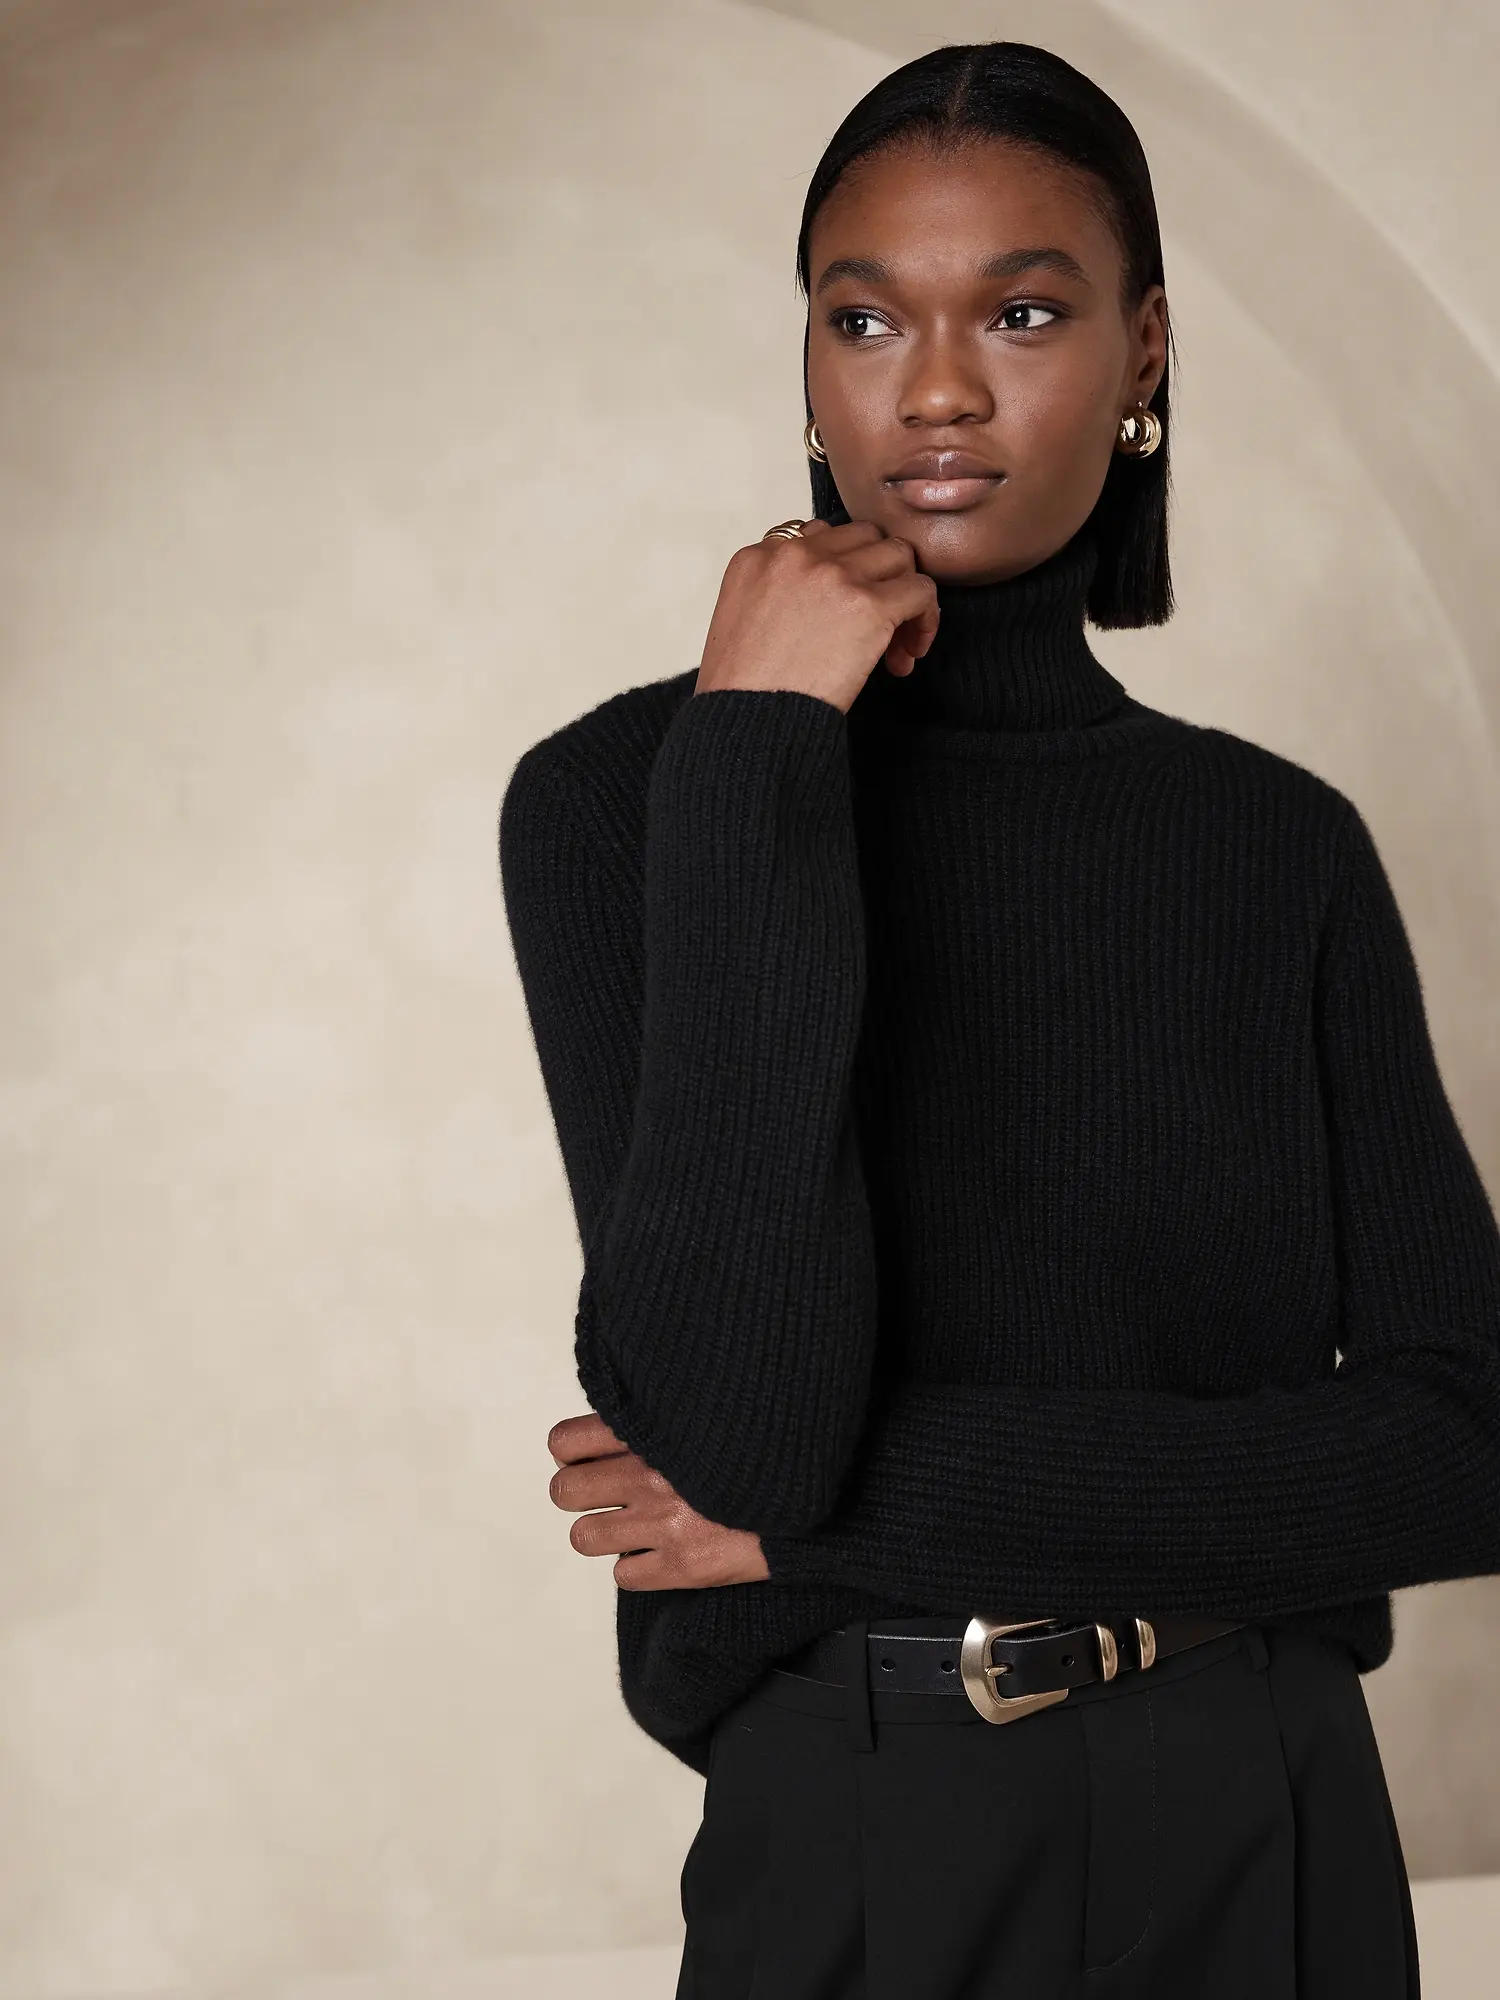 Banana Republic Has You Work and Occasions Ready for the Fall Season